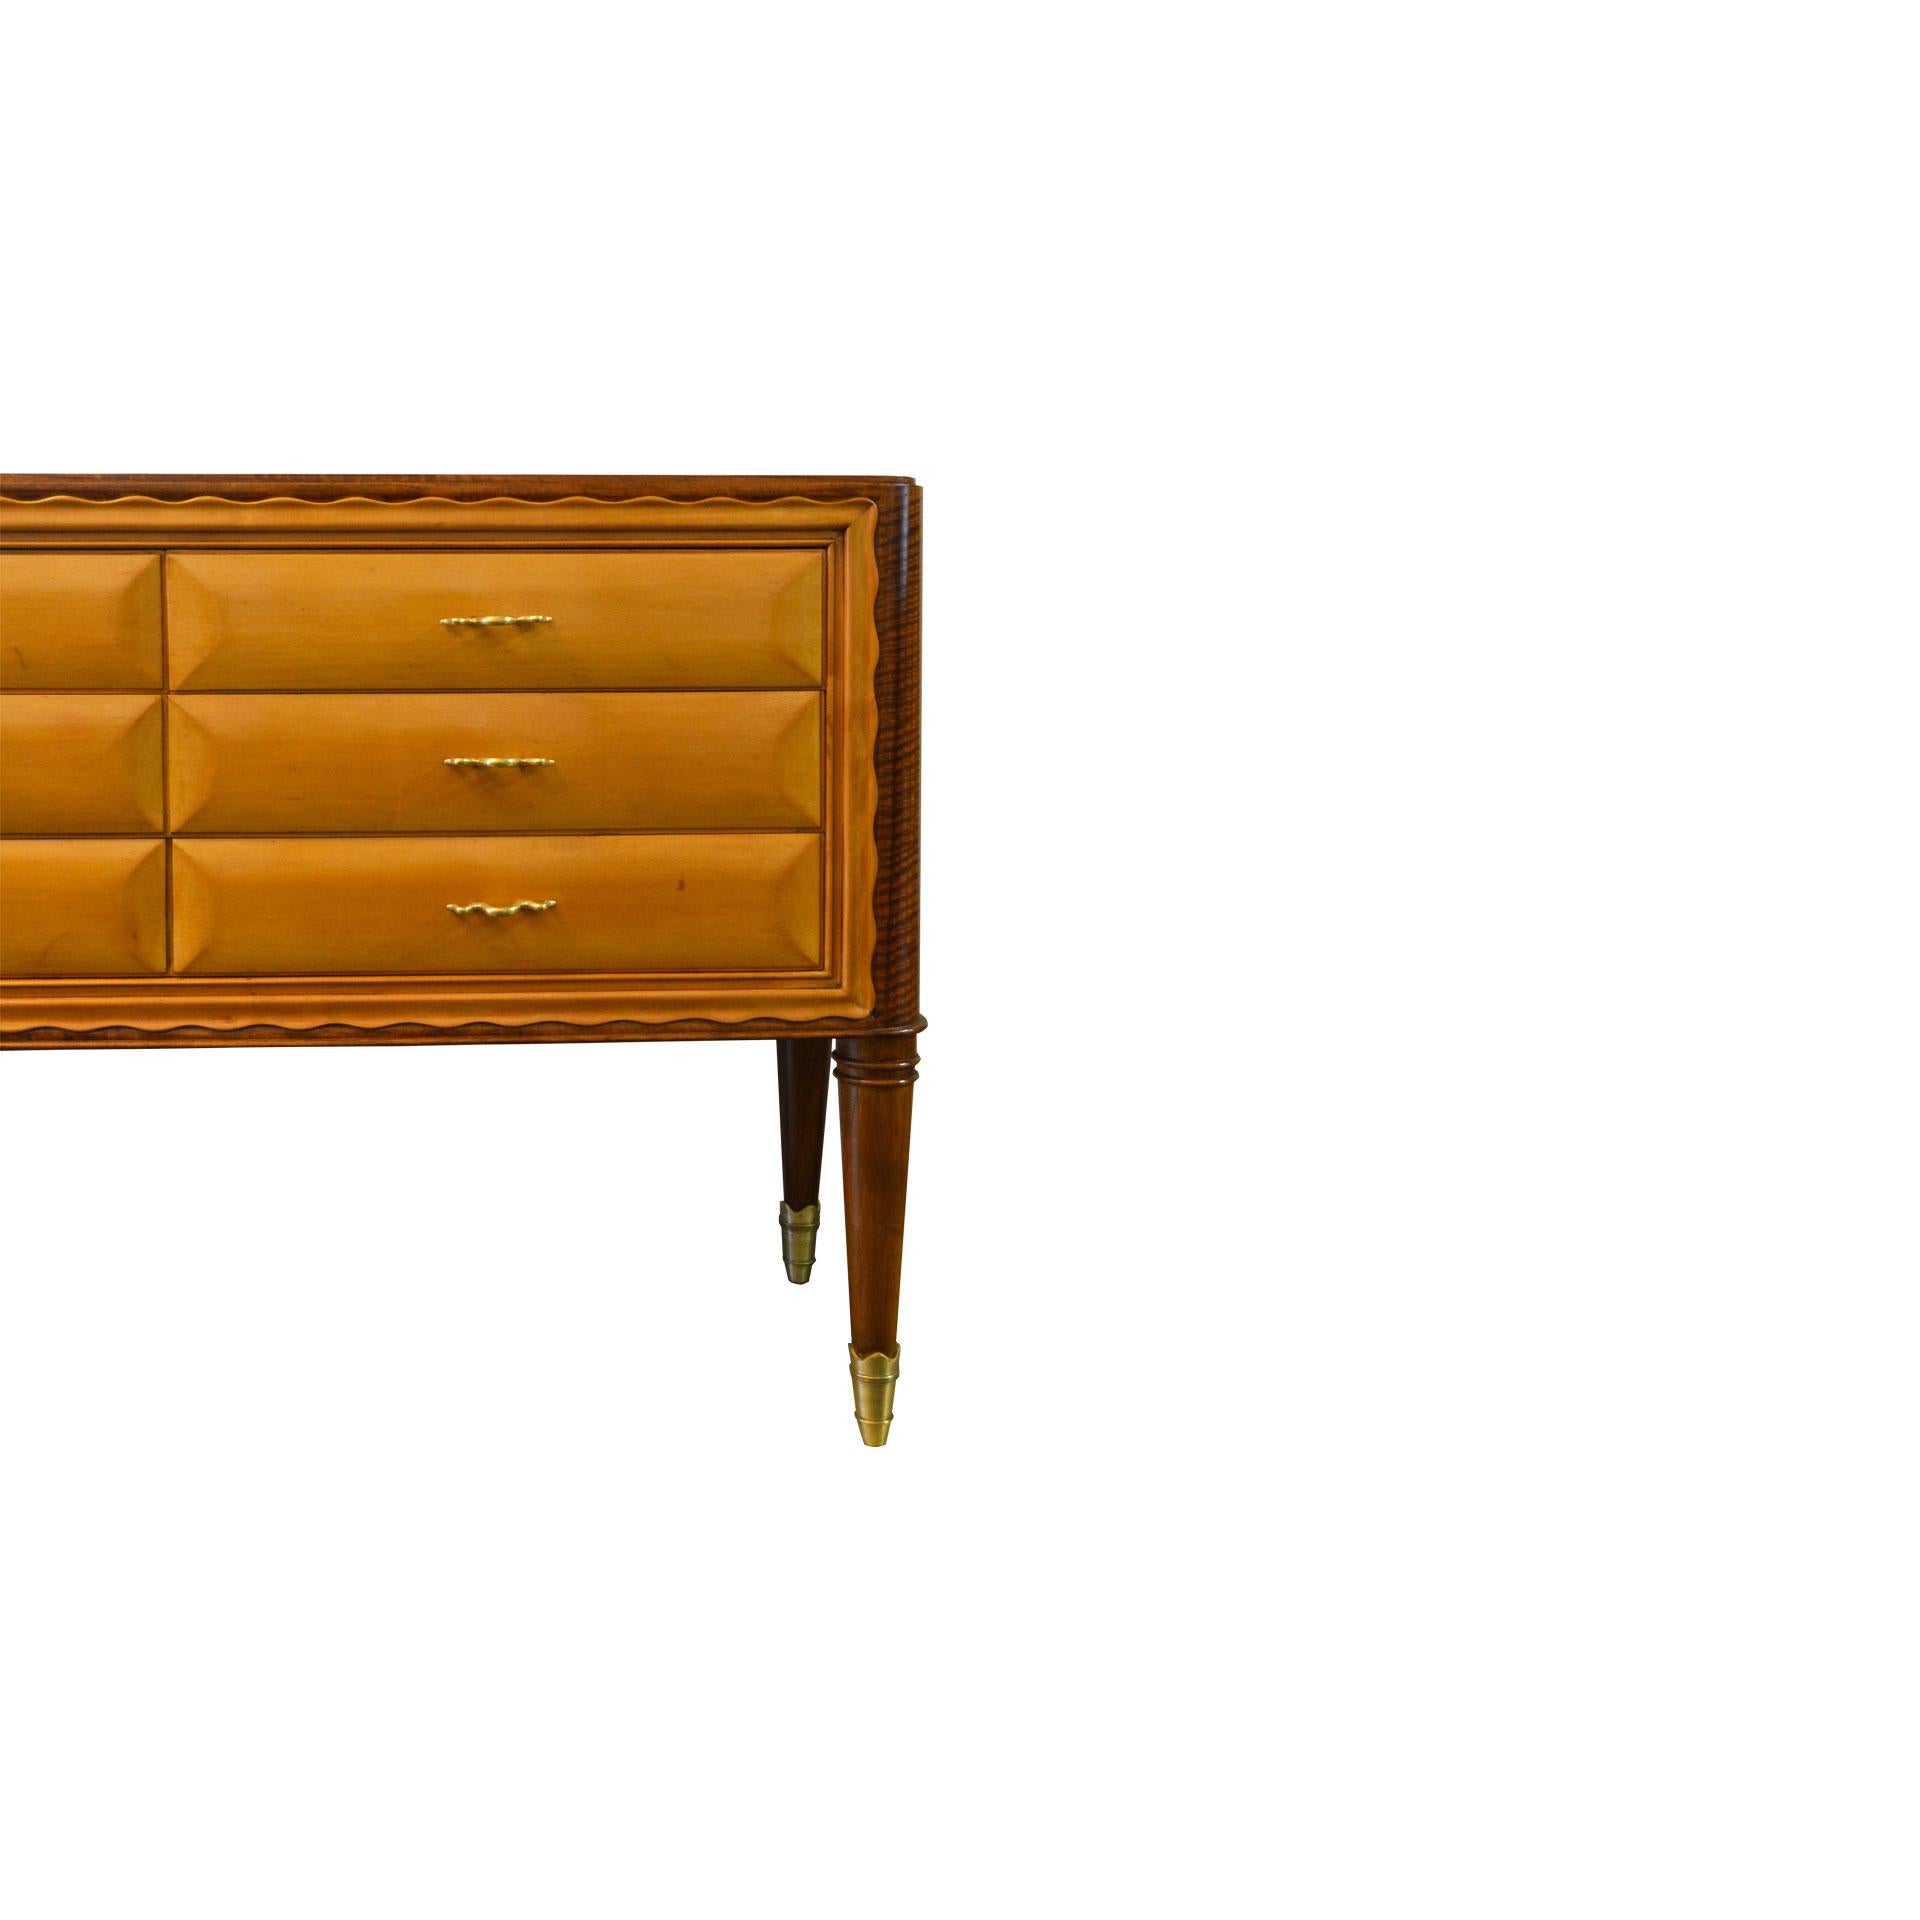 Italian 20th Century Sideboard with Drawers in the Style of Paolo Buffa Wood and Brass